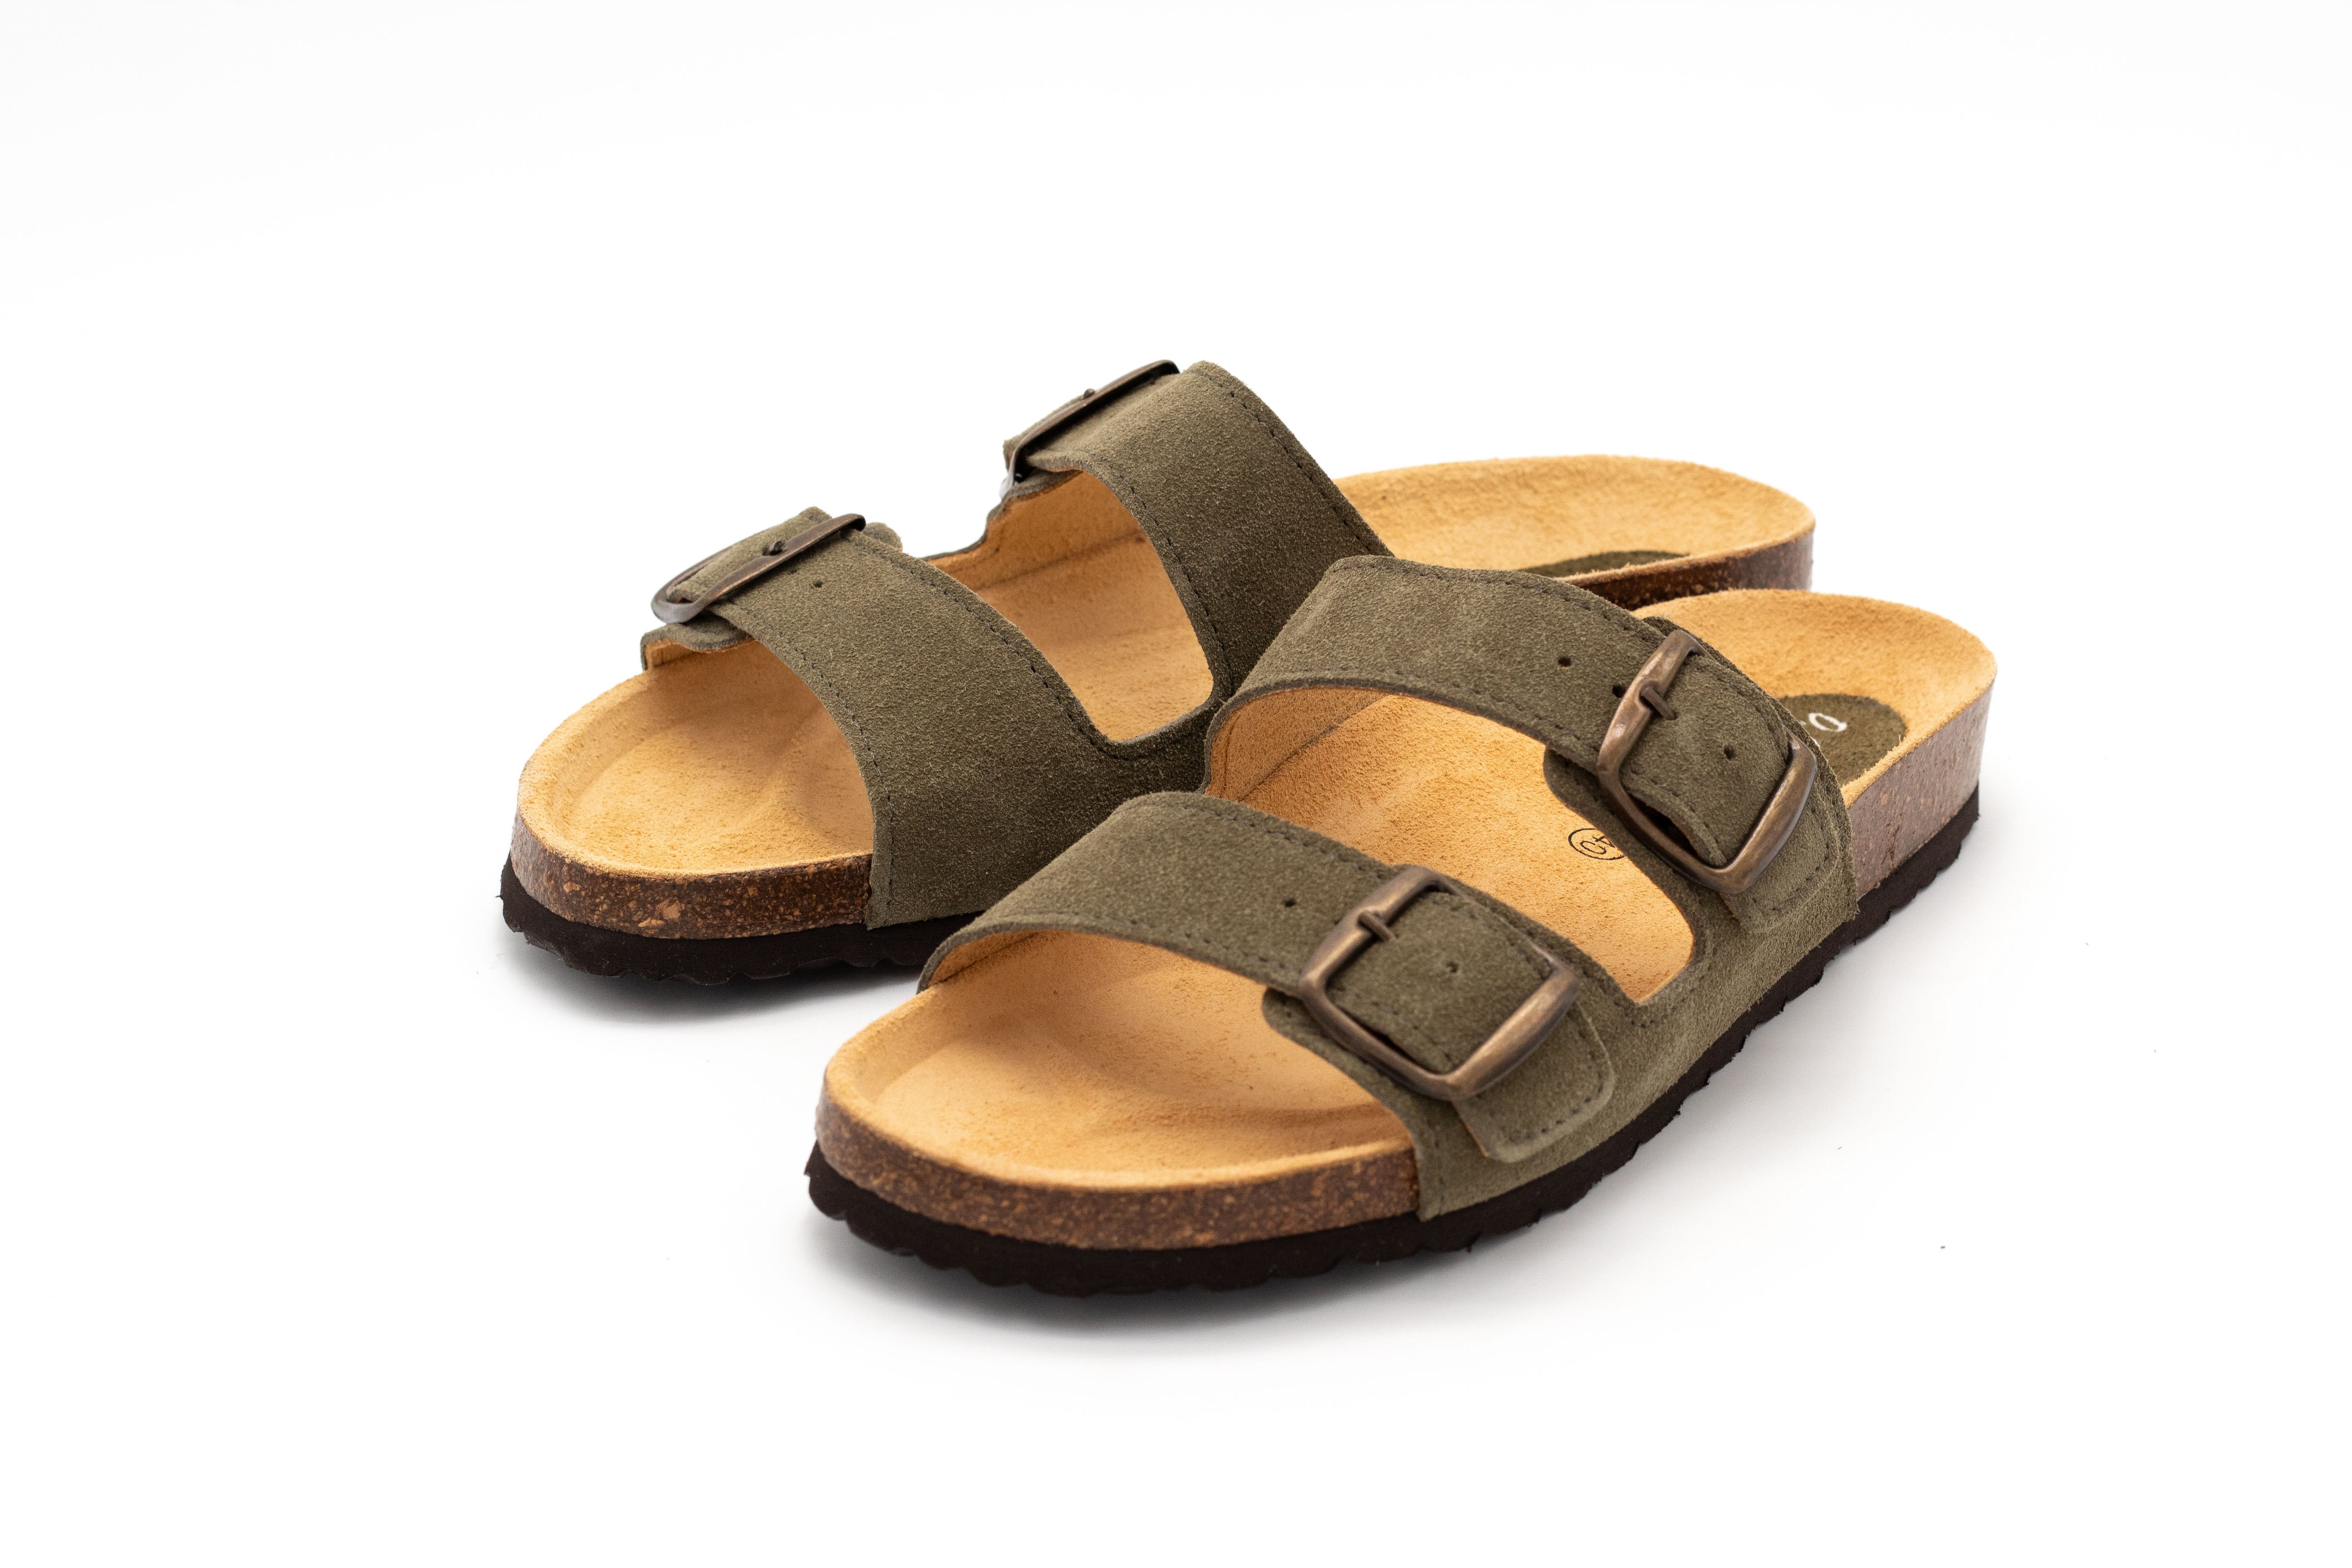 LISBON sandals with double bands in sheep's wool